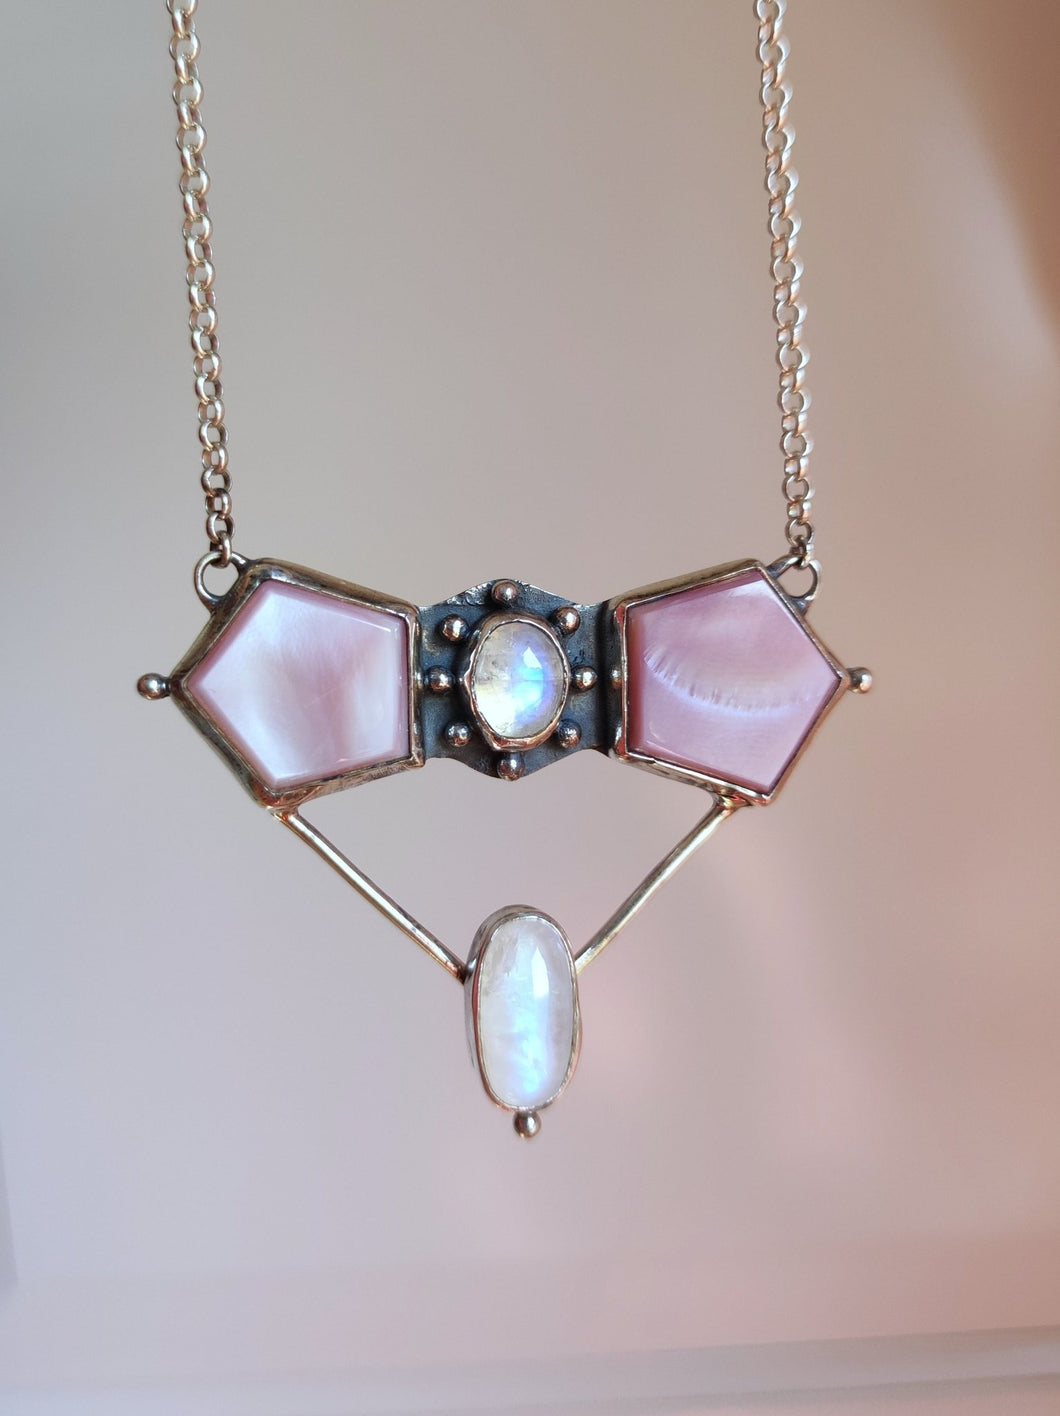 A Kathrin Jona Mother of Pearl Statement Necklace with a pink and white stone on it.